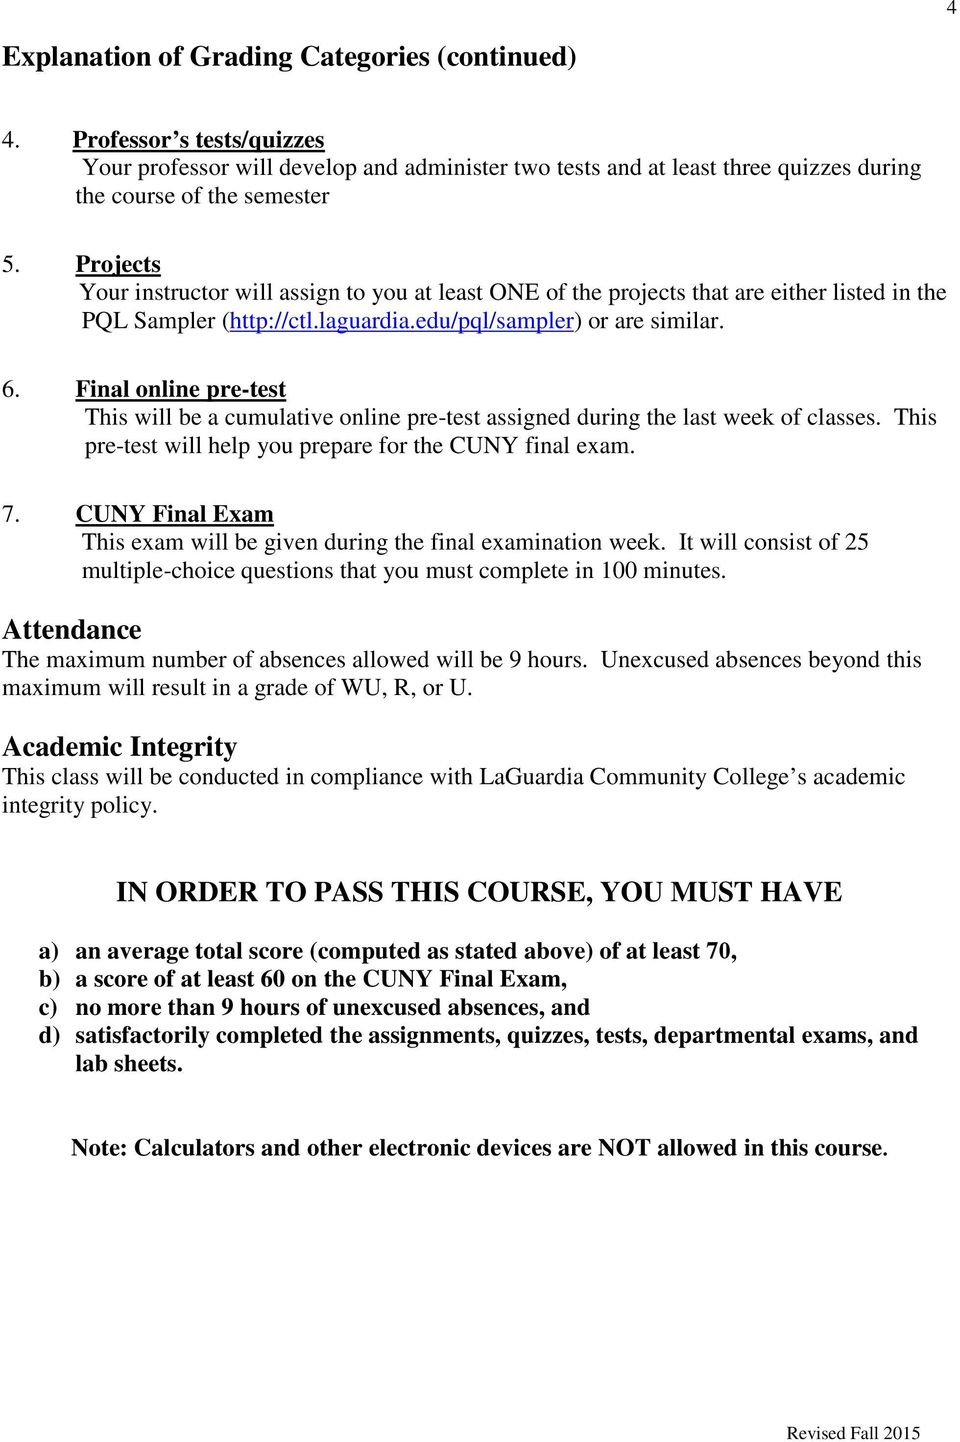 Final online pre-test This will be a cumulative online pre-test assigned during the last week of classes. This pre-test will help you prepare for the CUNY final exam. 7.